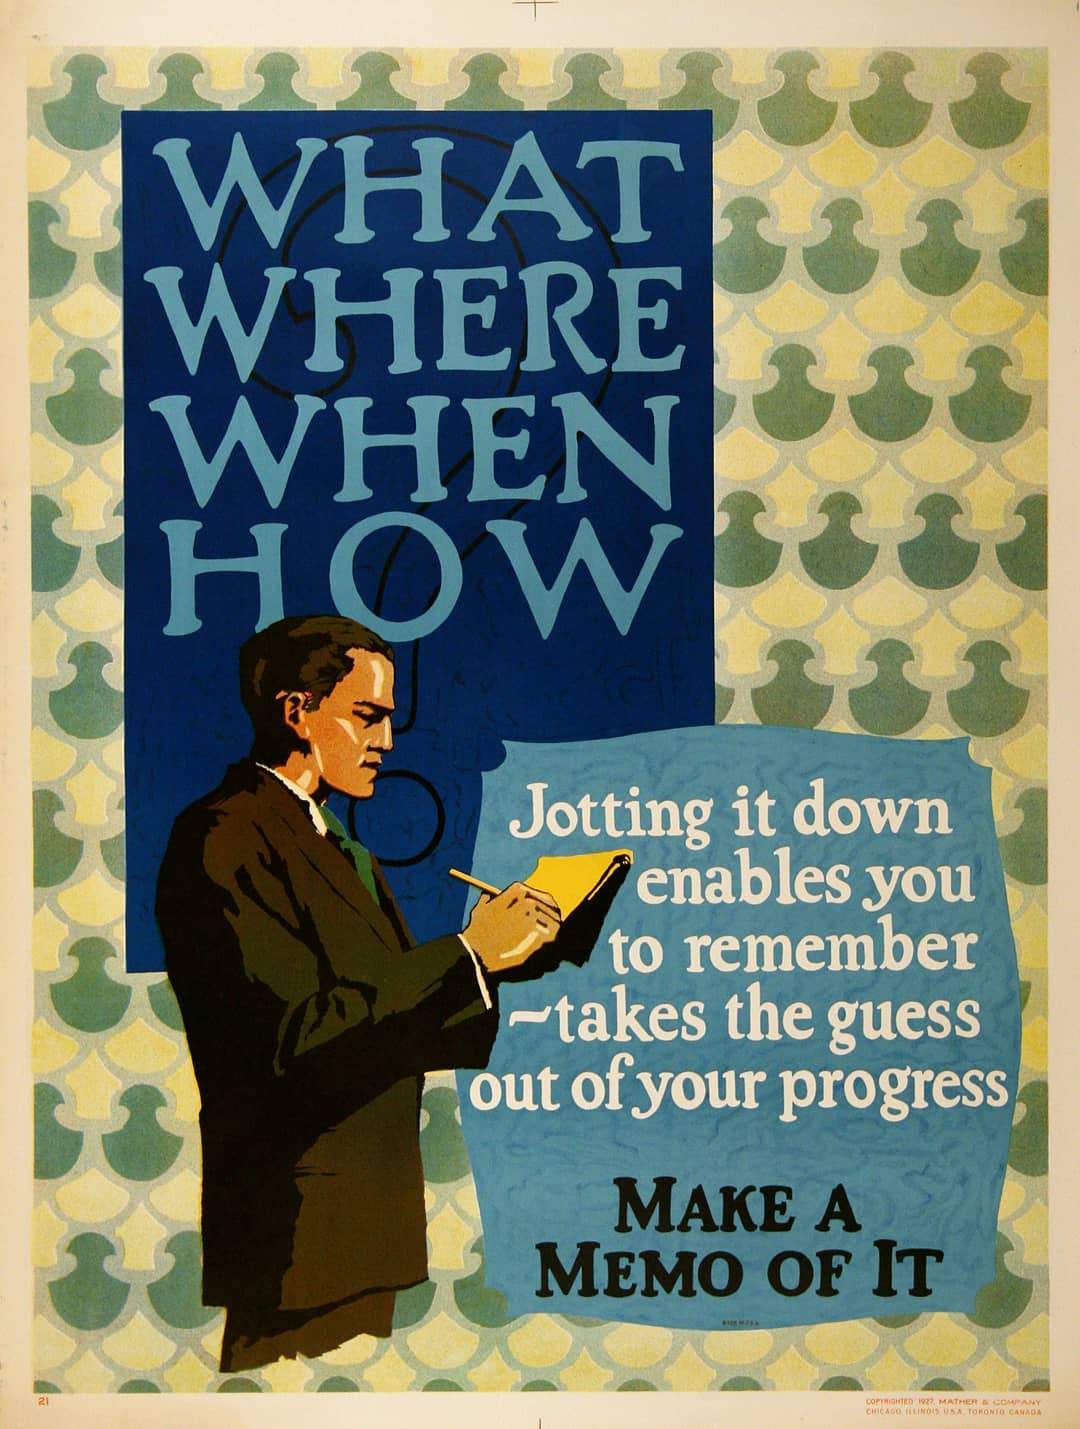 Original Mather Work Incentive Poster 1927 - What When Where How?